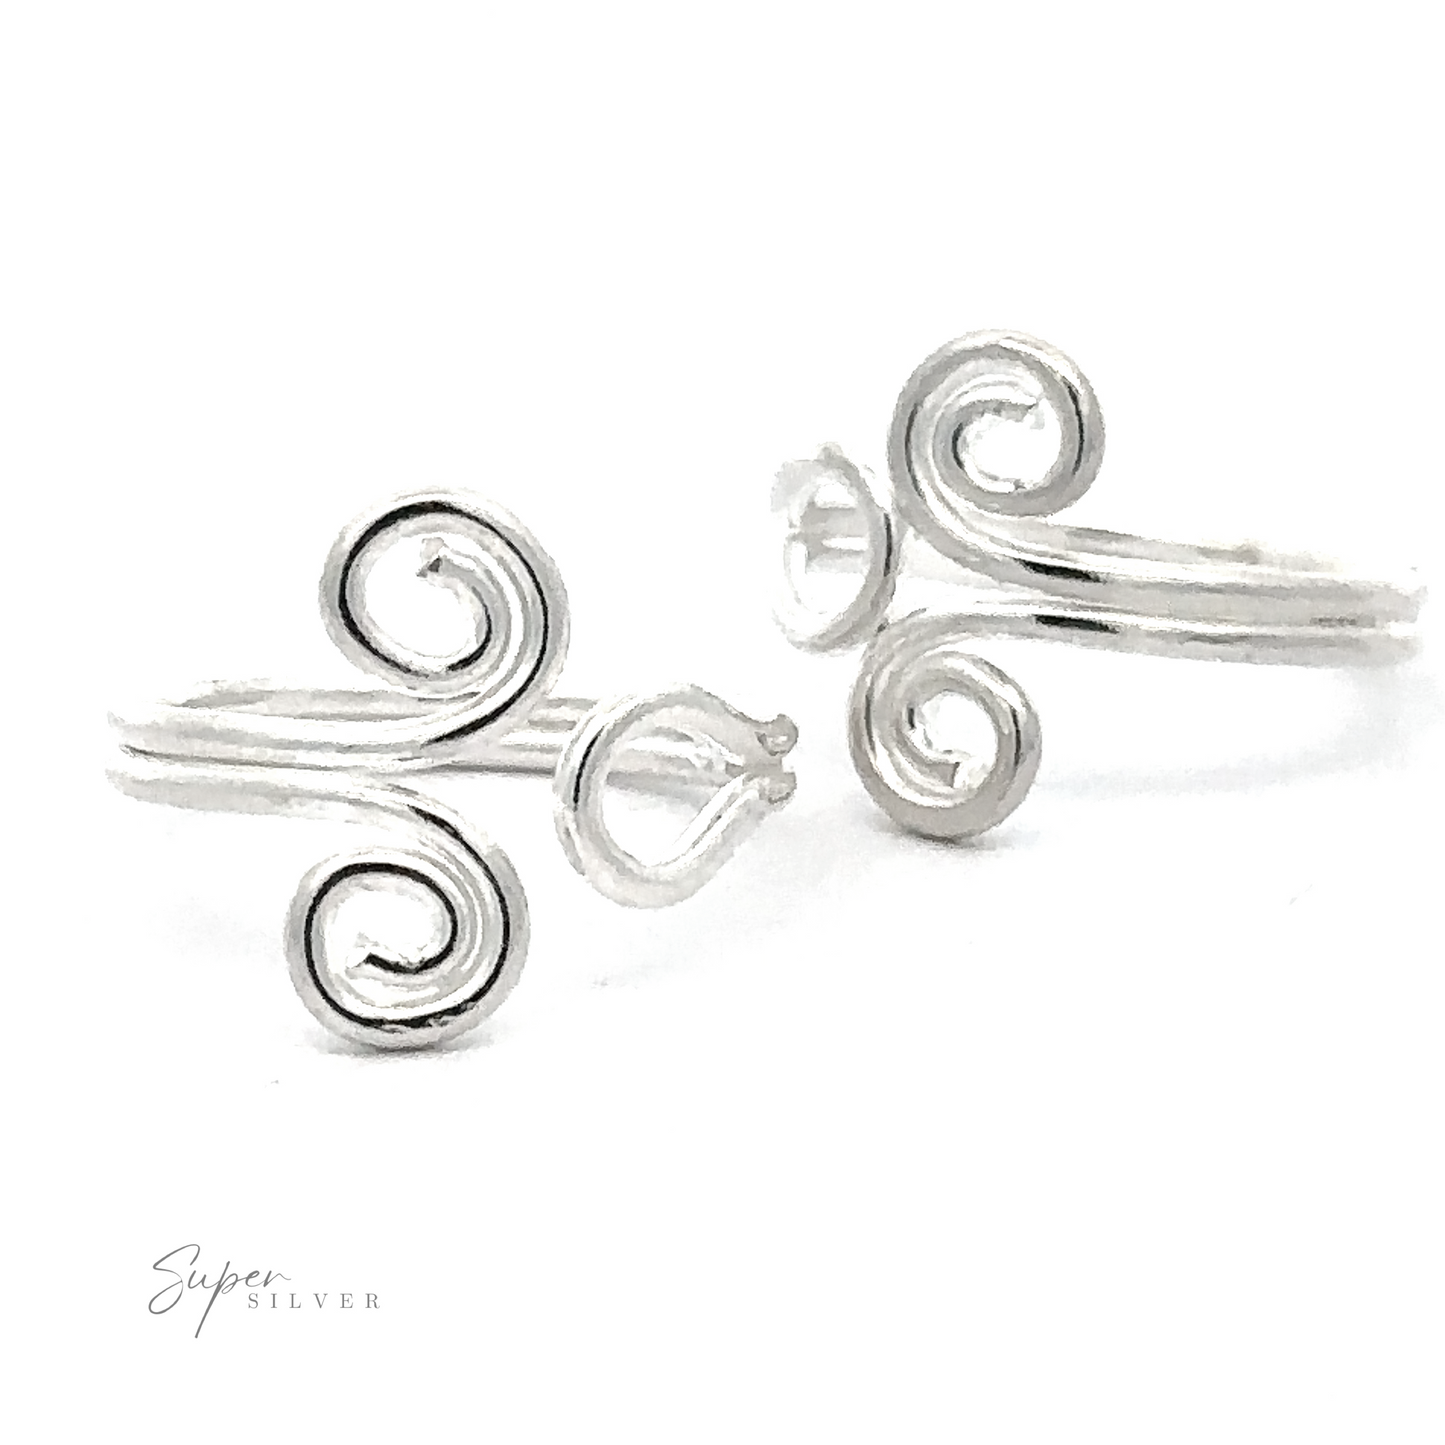 Wire Spiral Swirl Adjustable Toe Ring displayed on a plain white background, featuring boho chic aesthetics.